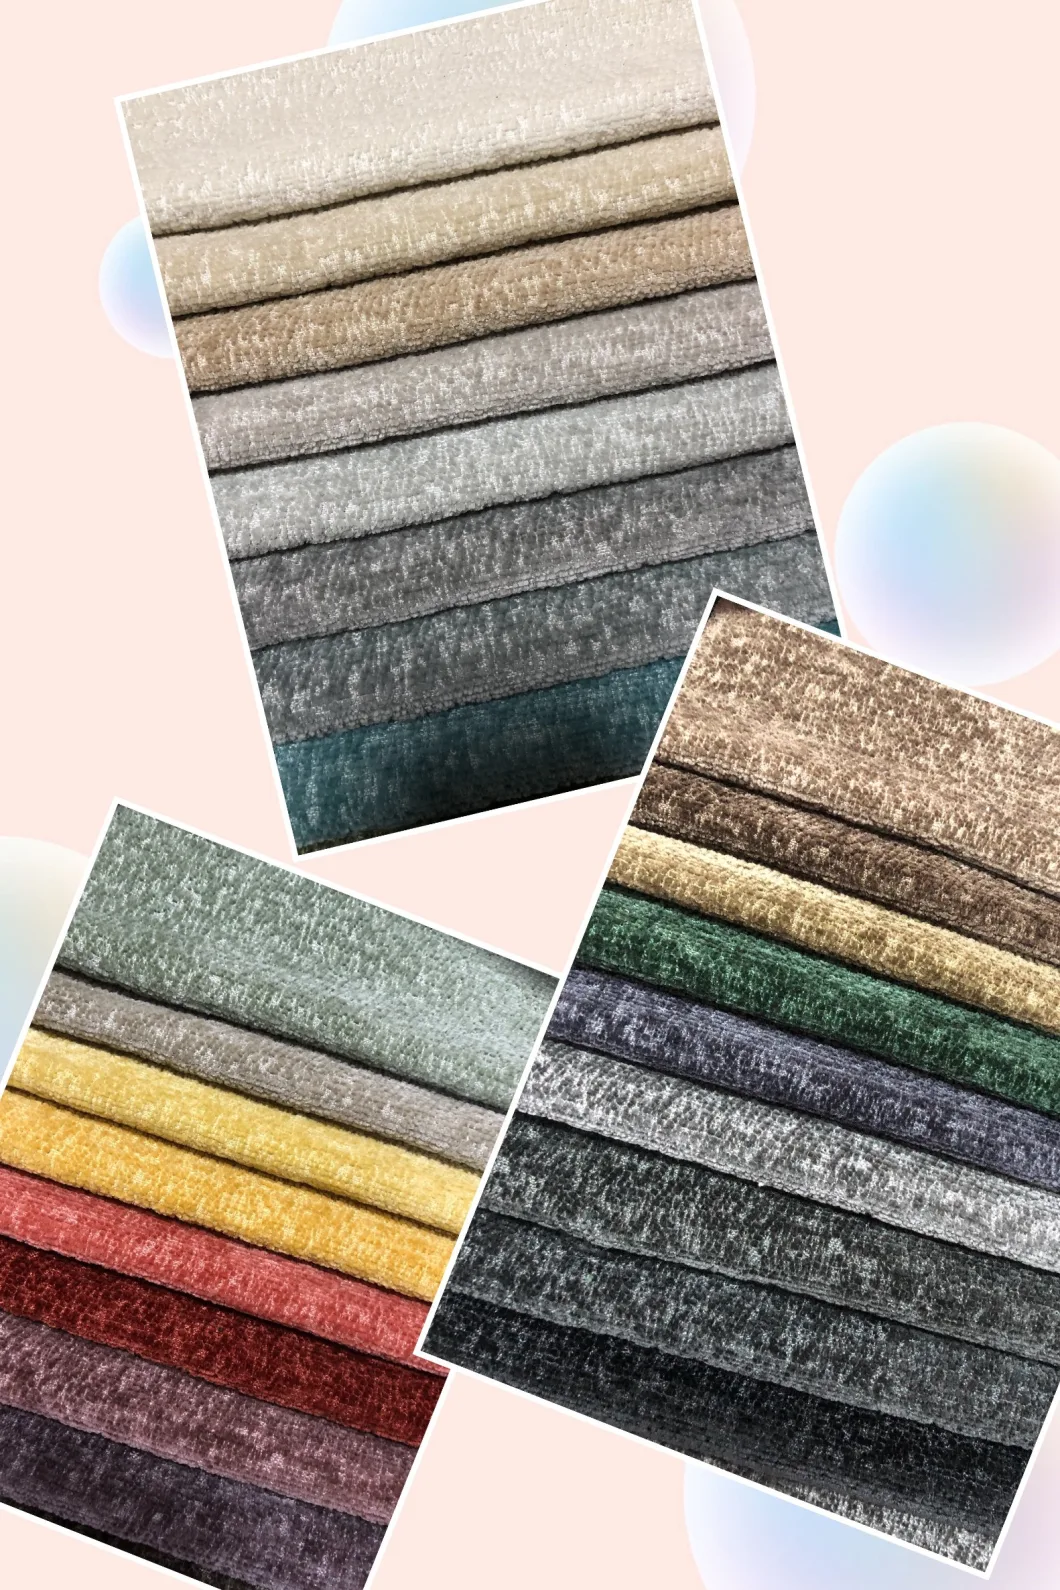 100%Polyester Chenille Fabric Sofa Fabric Furniture Fabric Upholstery Fabric